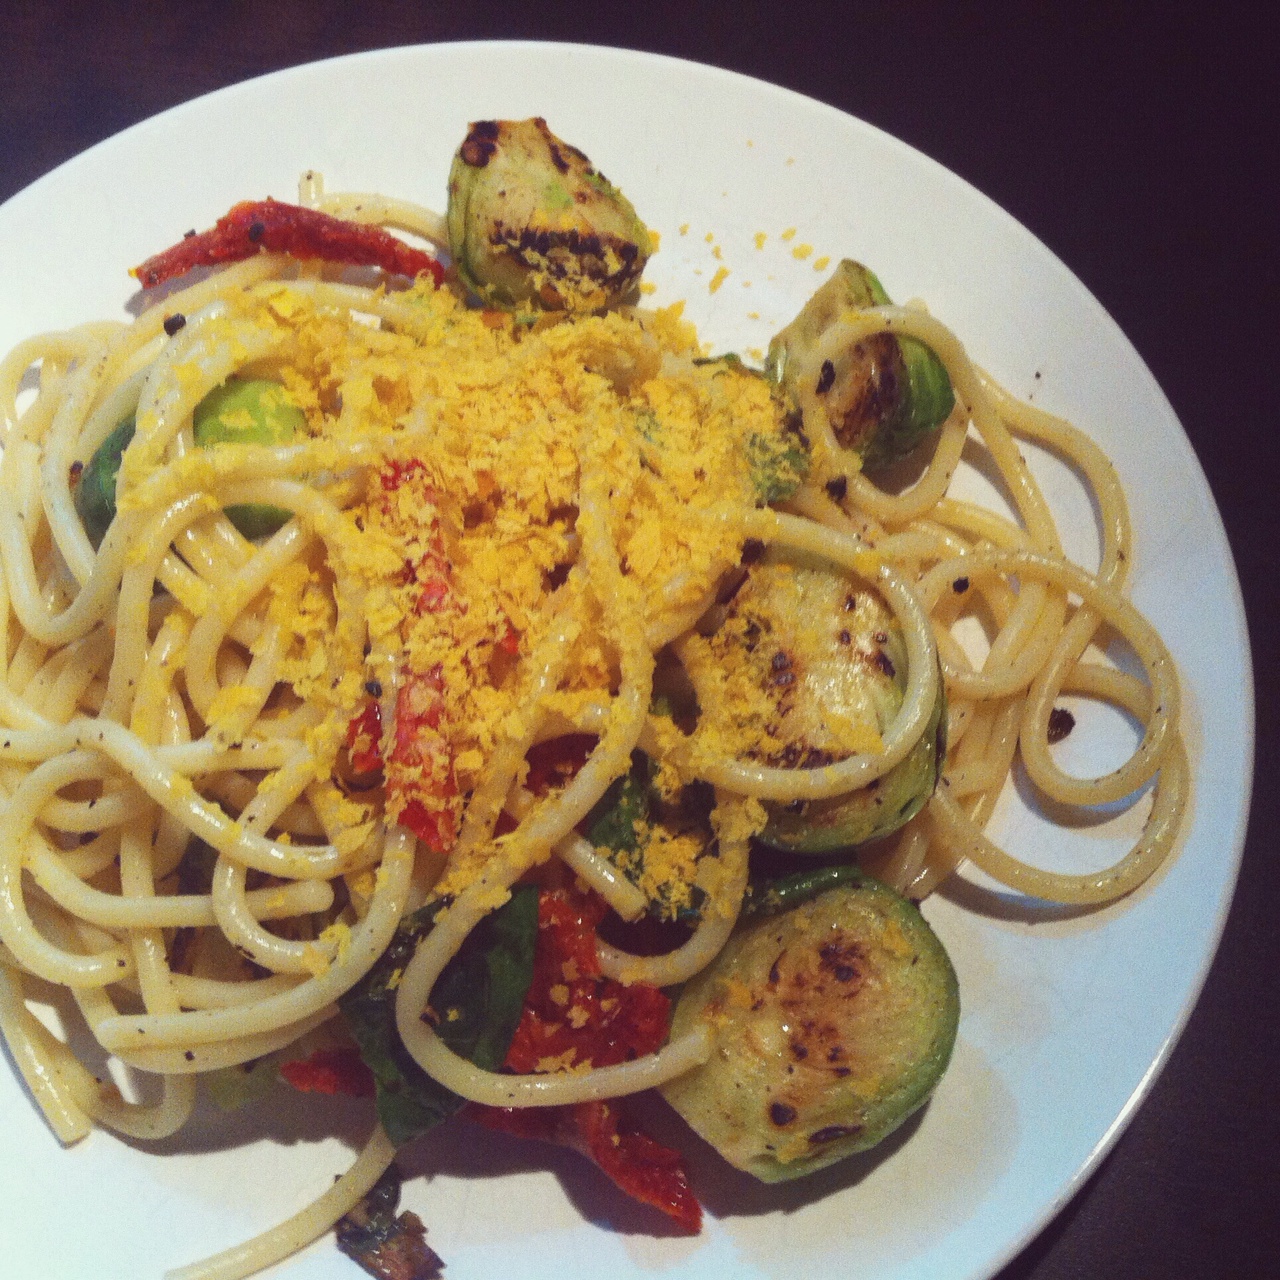 Spaghetti with Brussels Sprouts and Tomatoes